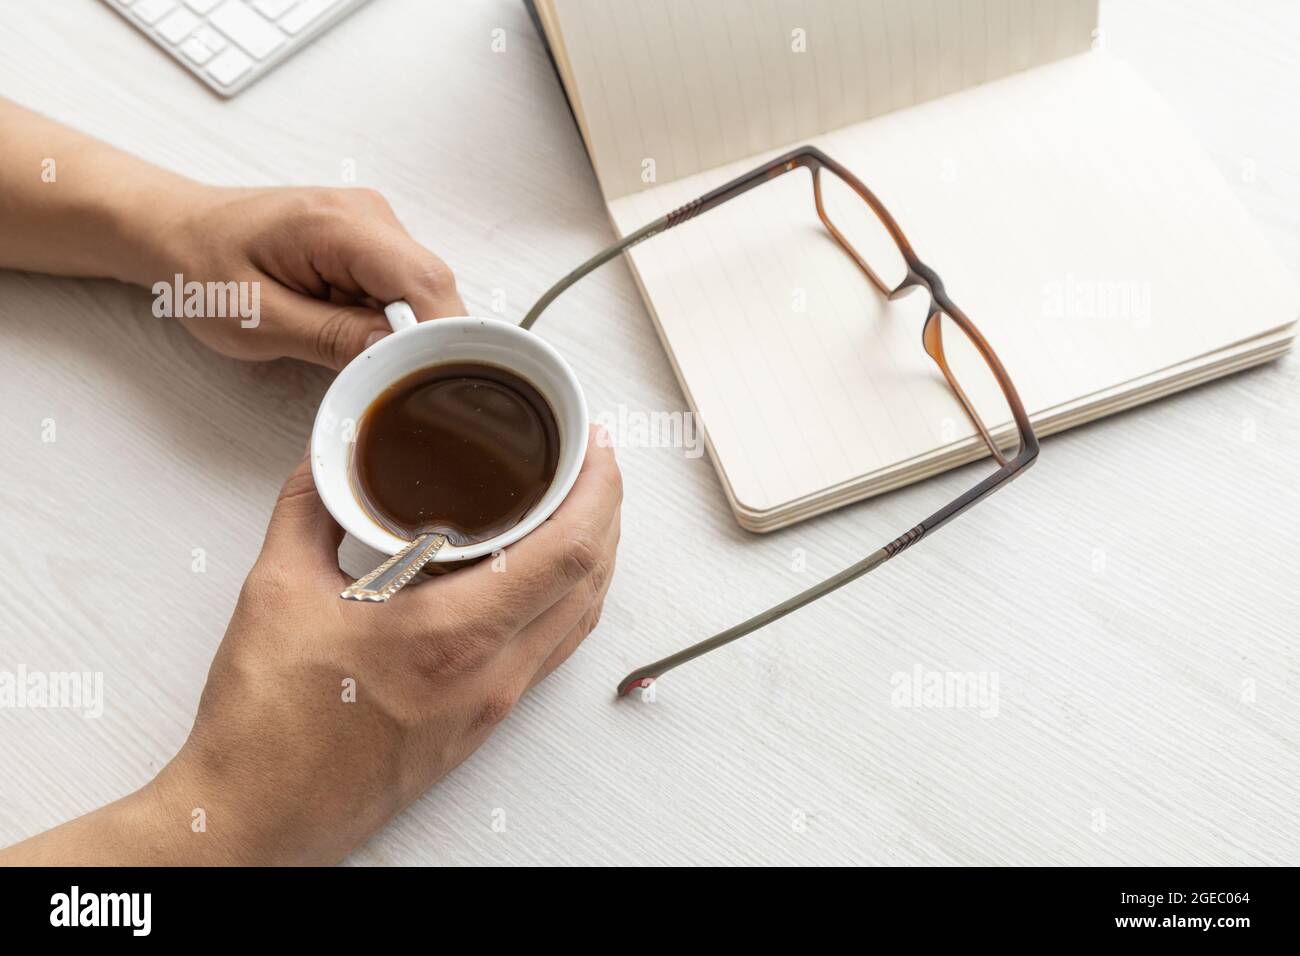 on a desk a person's hands holding a cup of coffee, with a notebook with open blank sheets and modern glasses, lifestyle in the workplace, studio Stock Photo